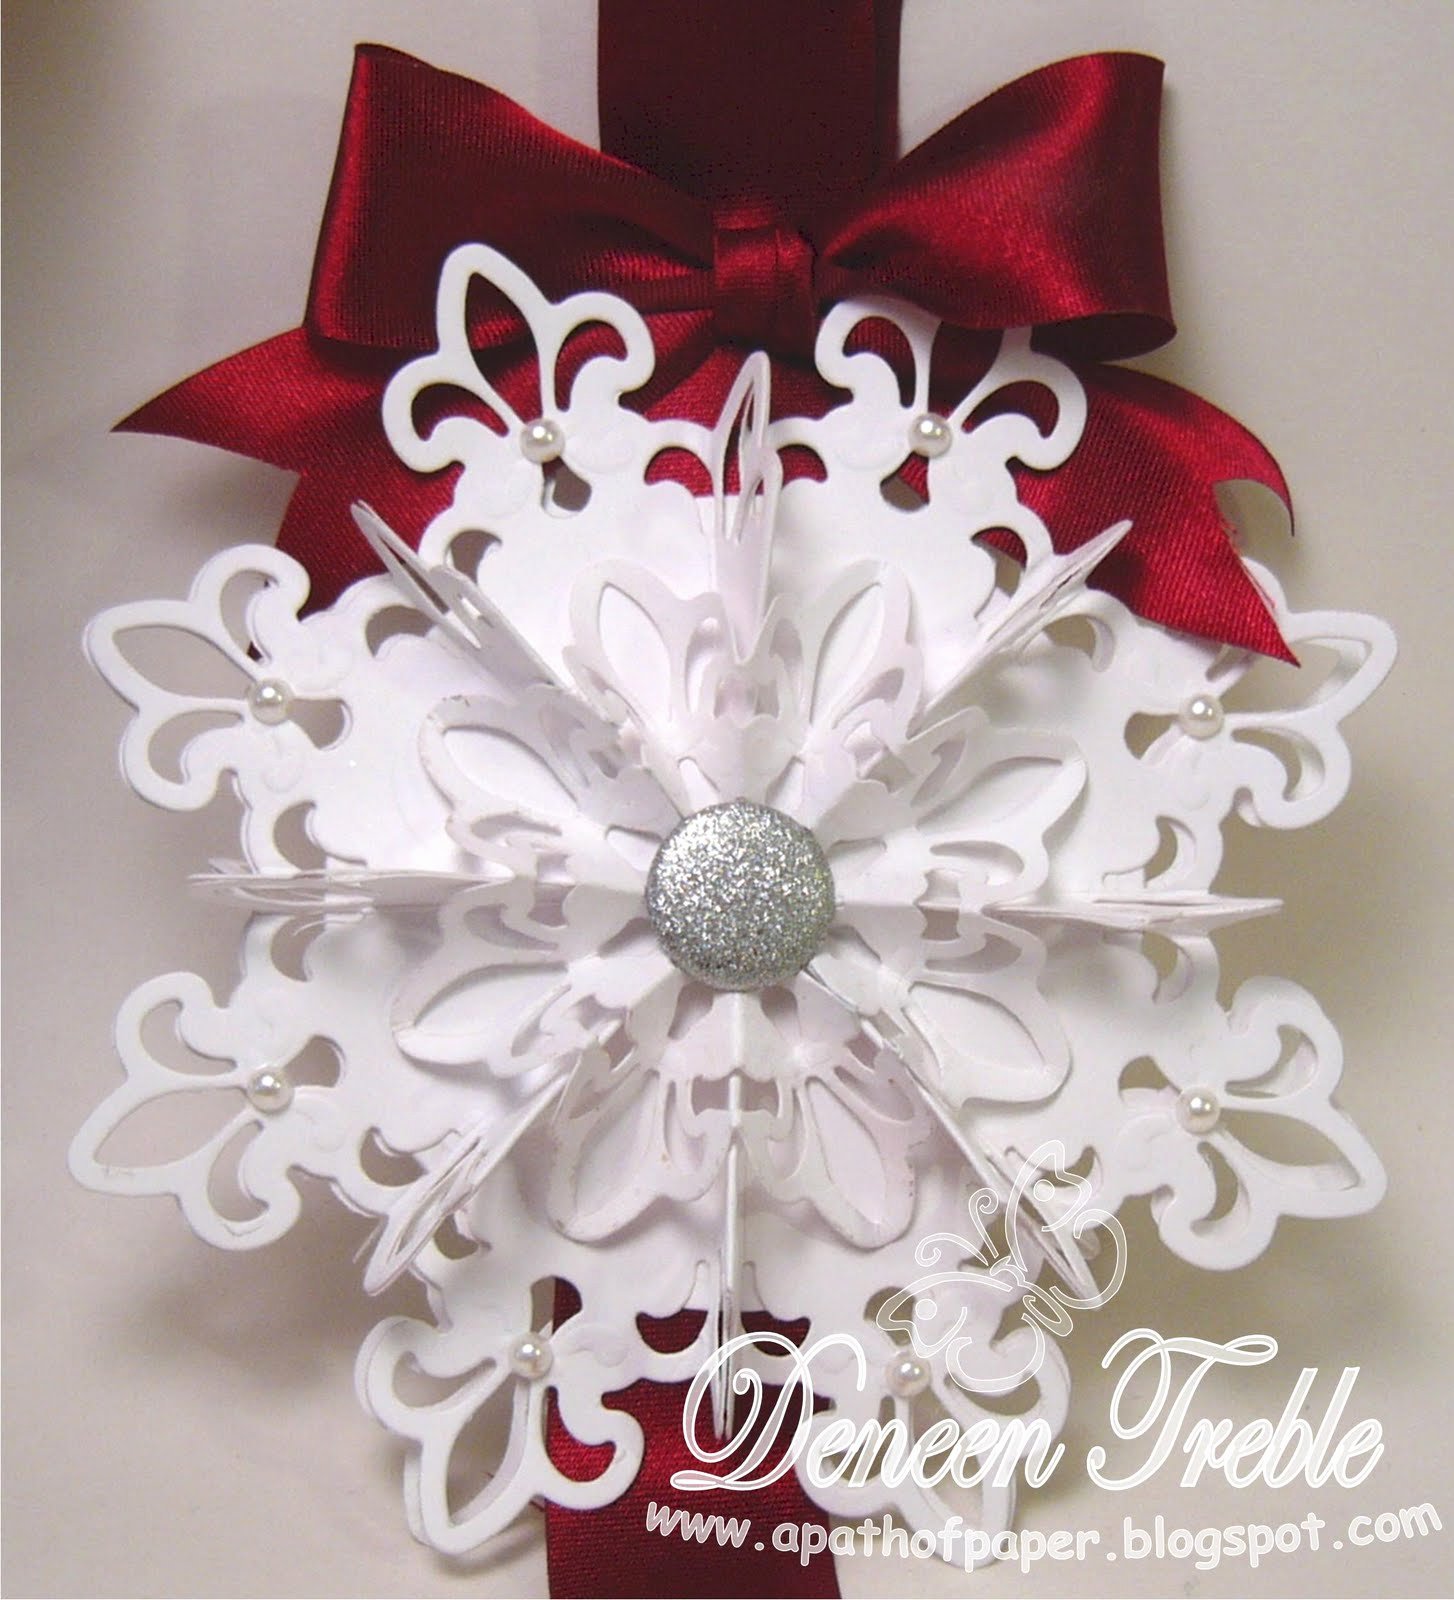 How to Make 3d Snowflakes Inspirational A Path Of Paper top Tip Tuesday Snowflakes